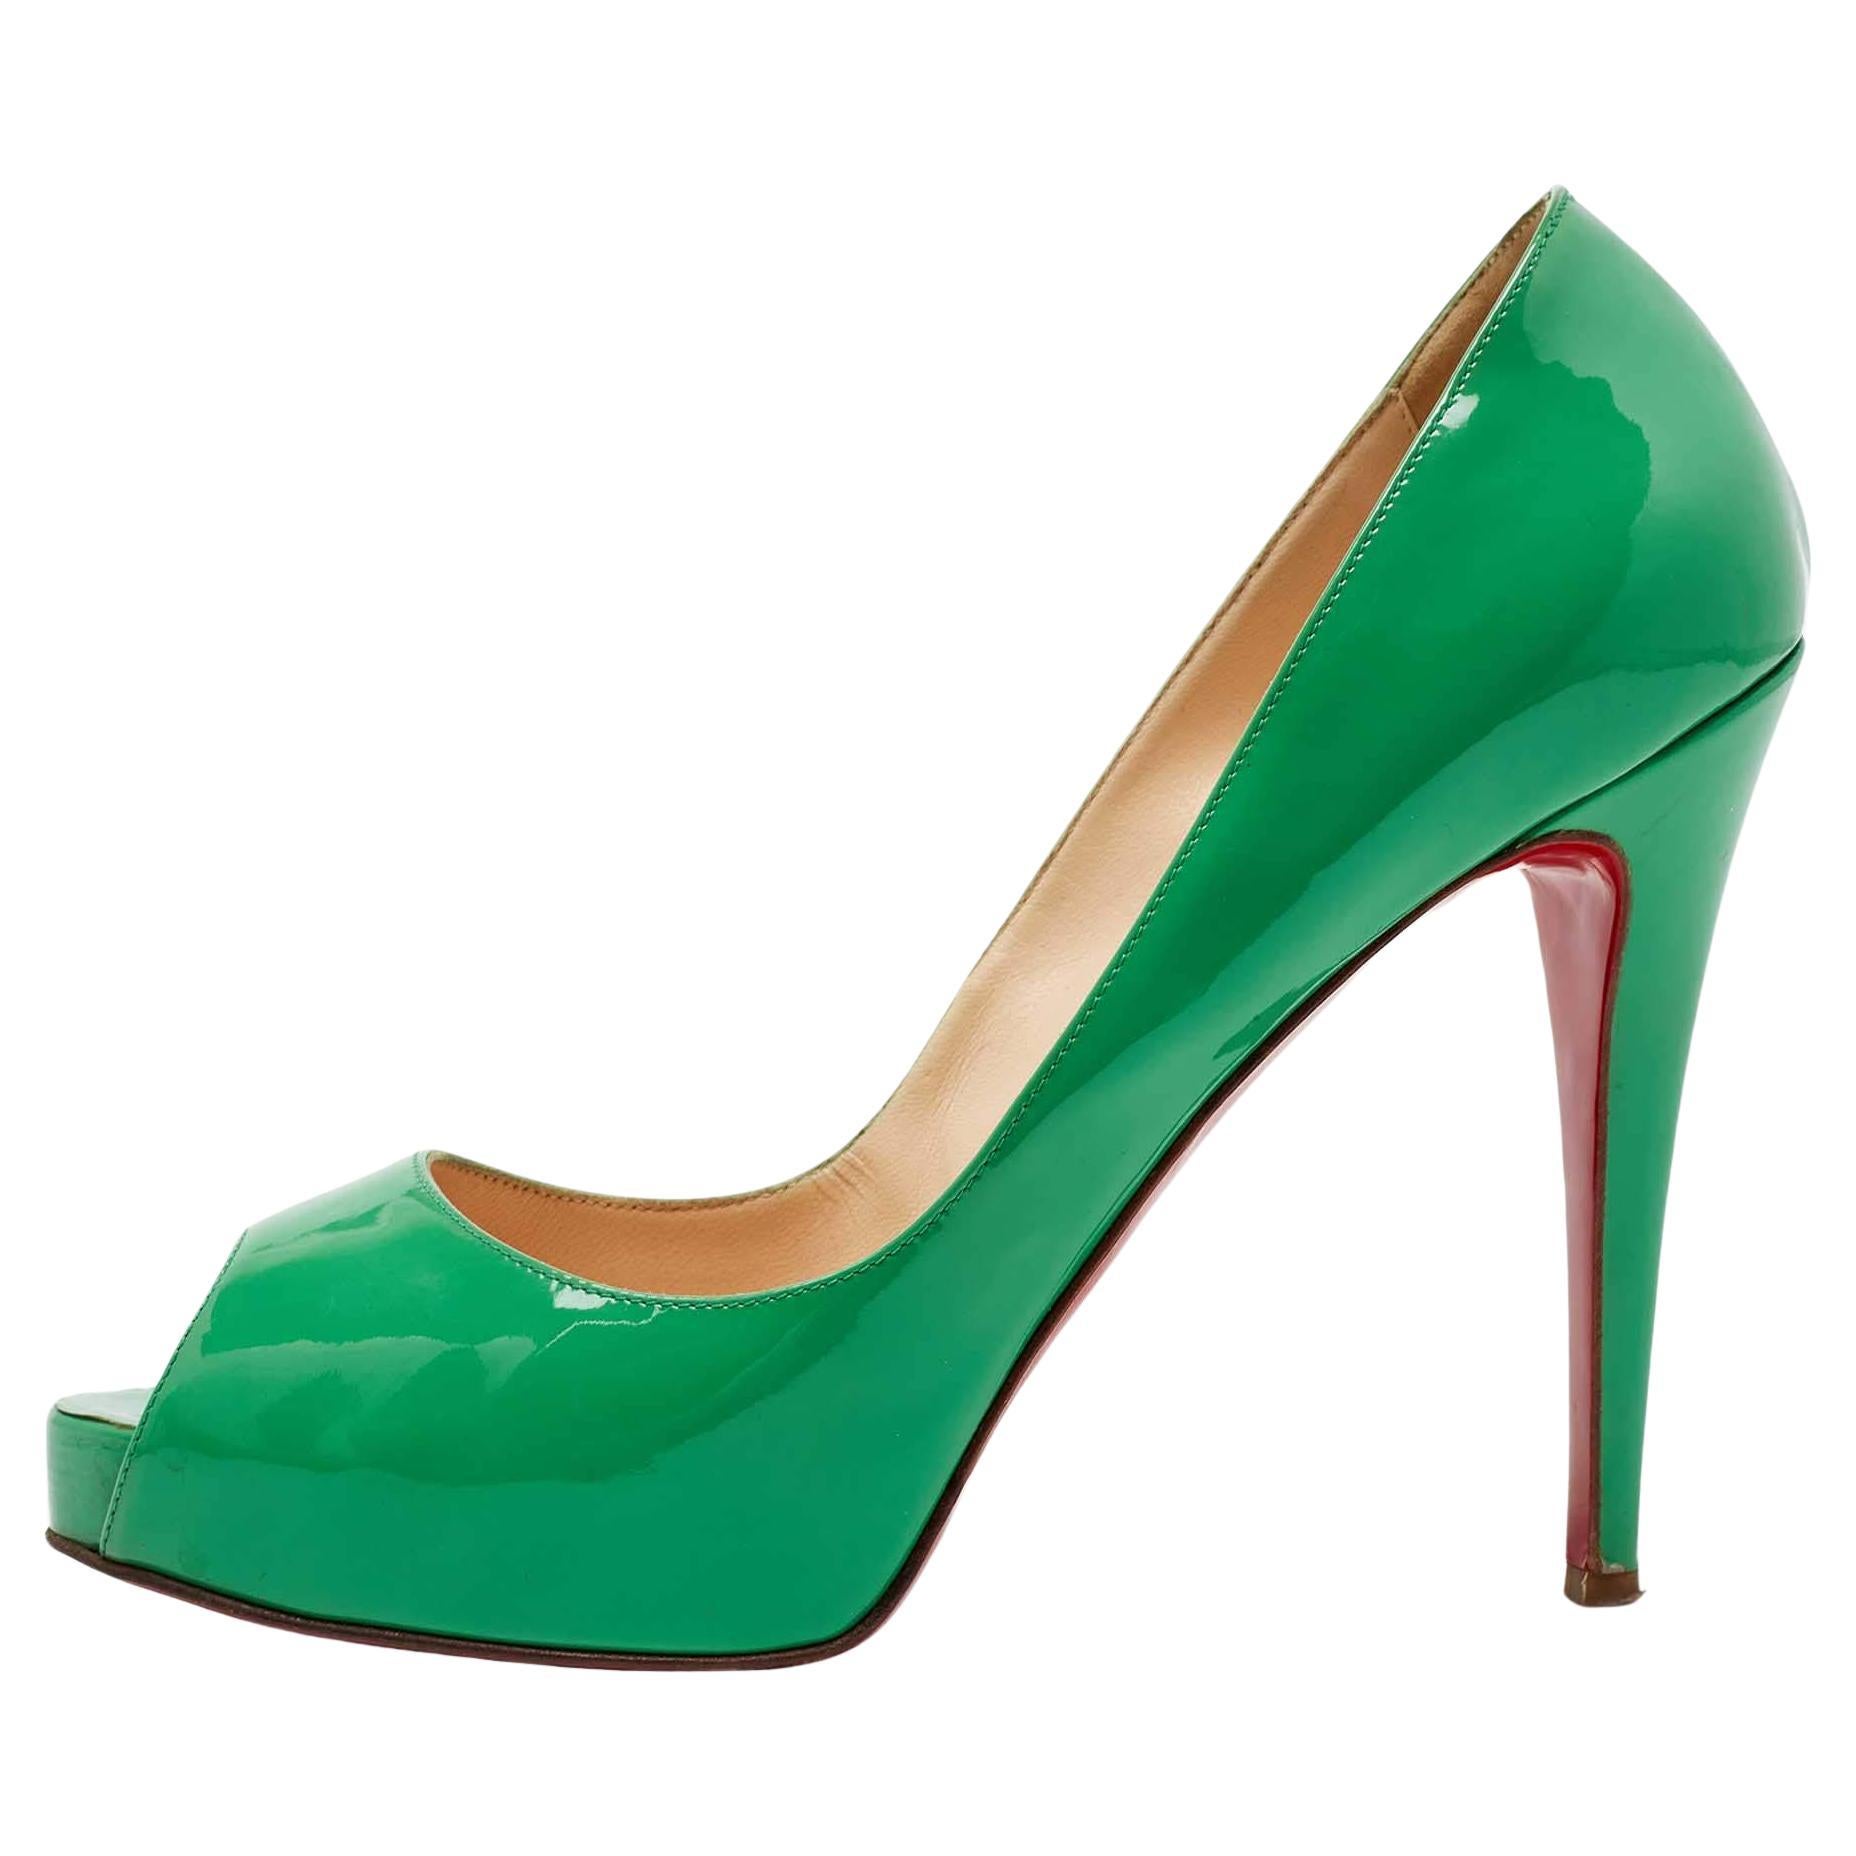 Christian Louboutin Green Patent Leather Very Prive Pumps Size 41